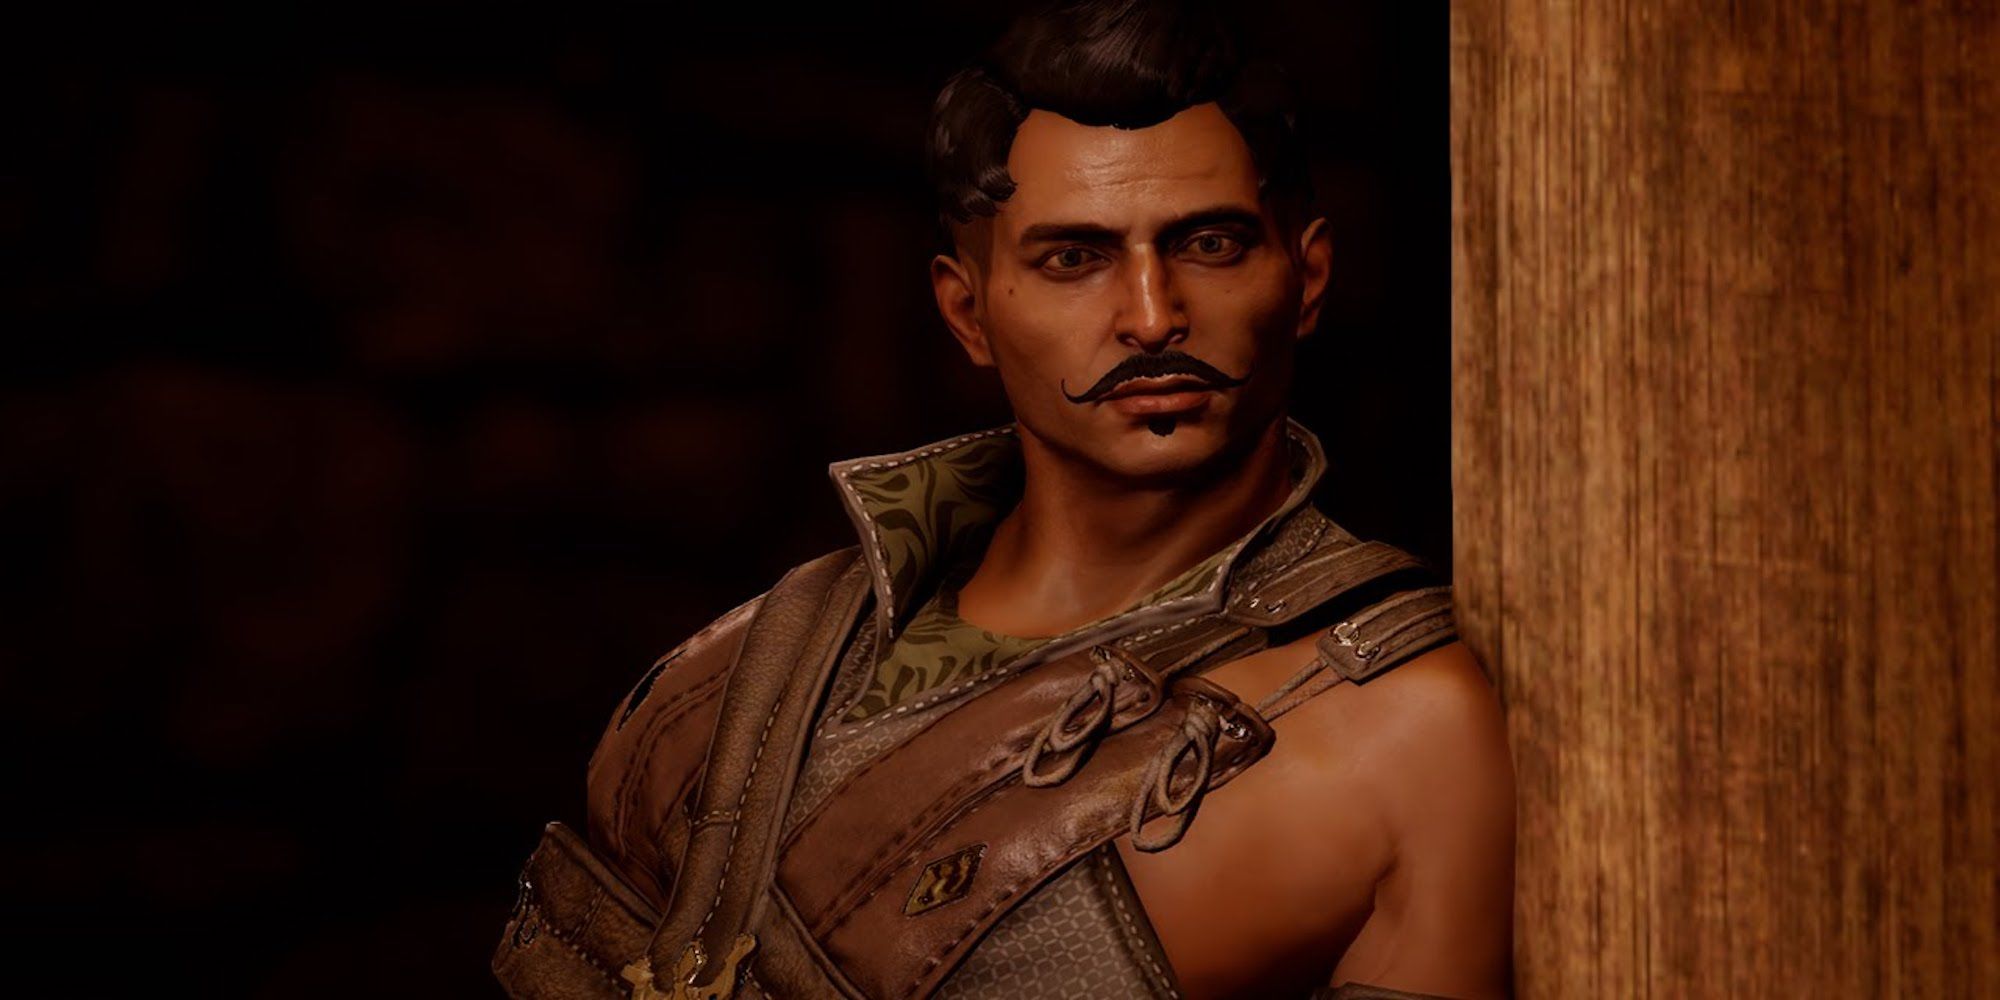 Dorian Pavus leaned against a wall (Dragon Age: Inquisition)